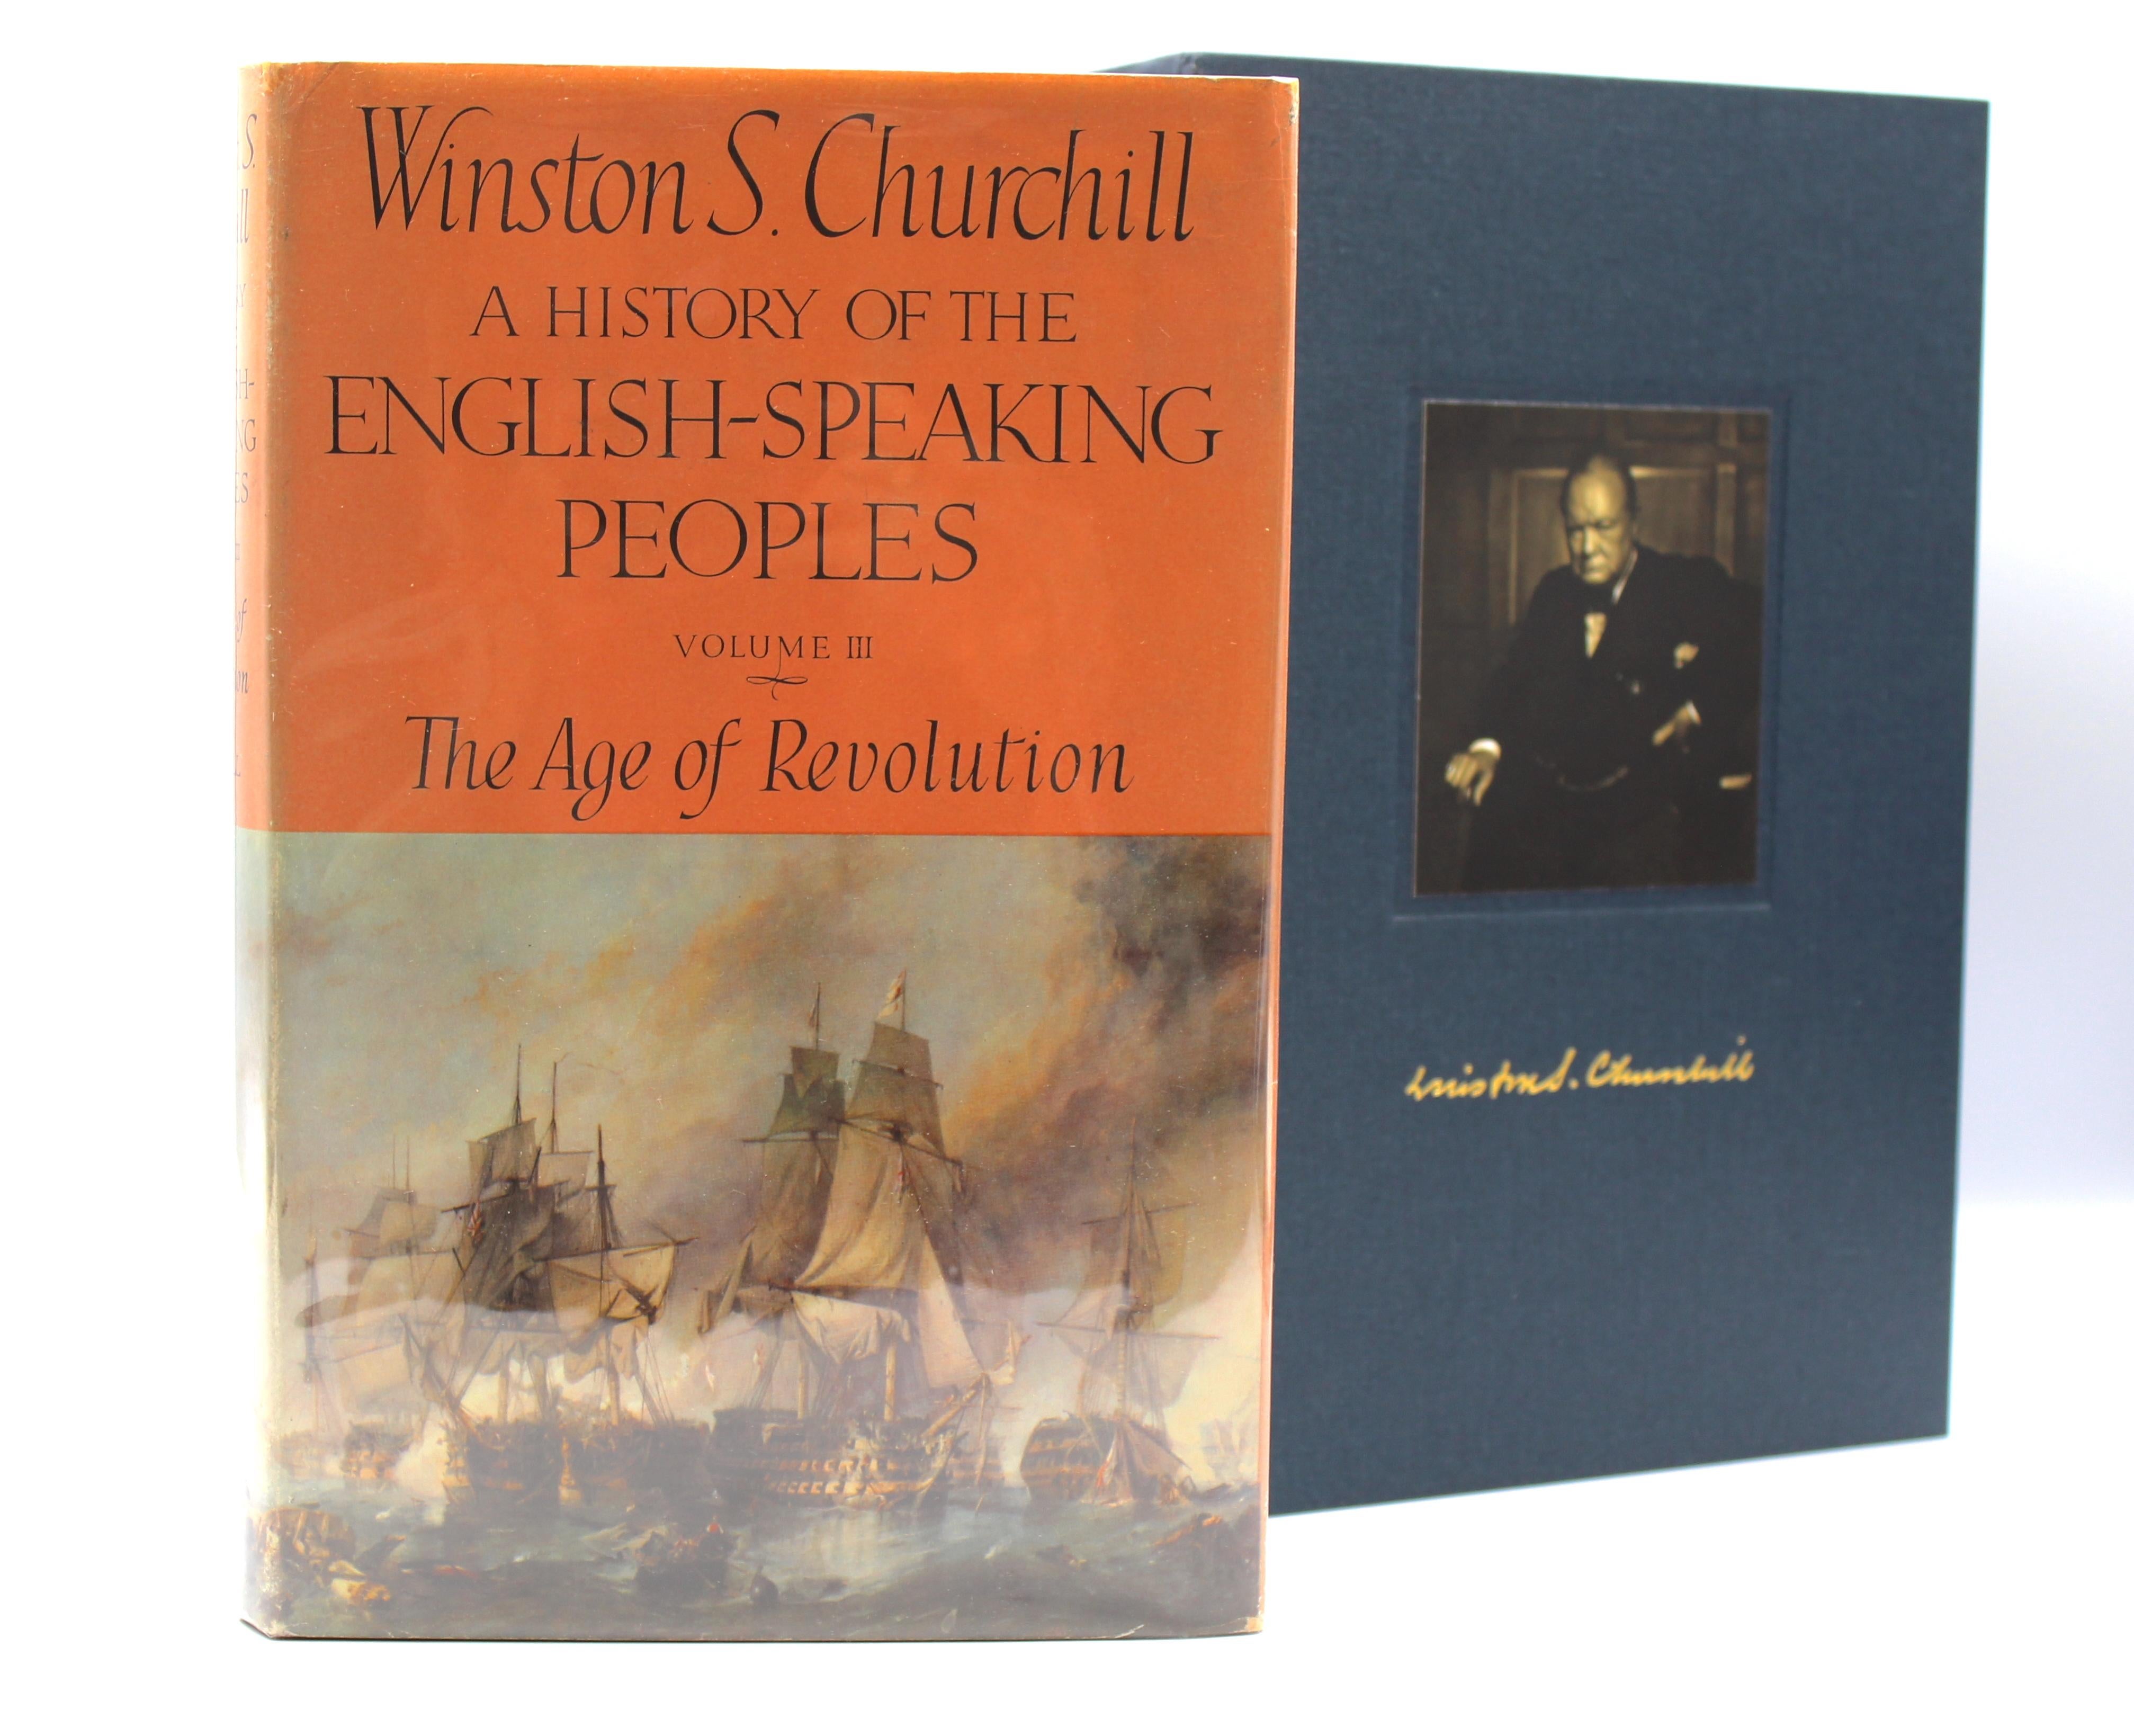 A History of the English-Speaking Peoples by Winston Churchill, First Edition 1